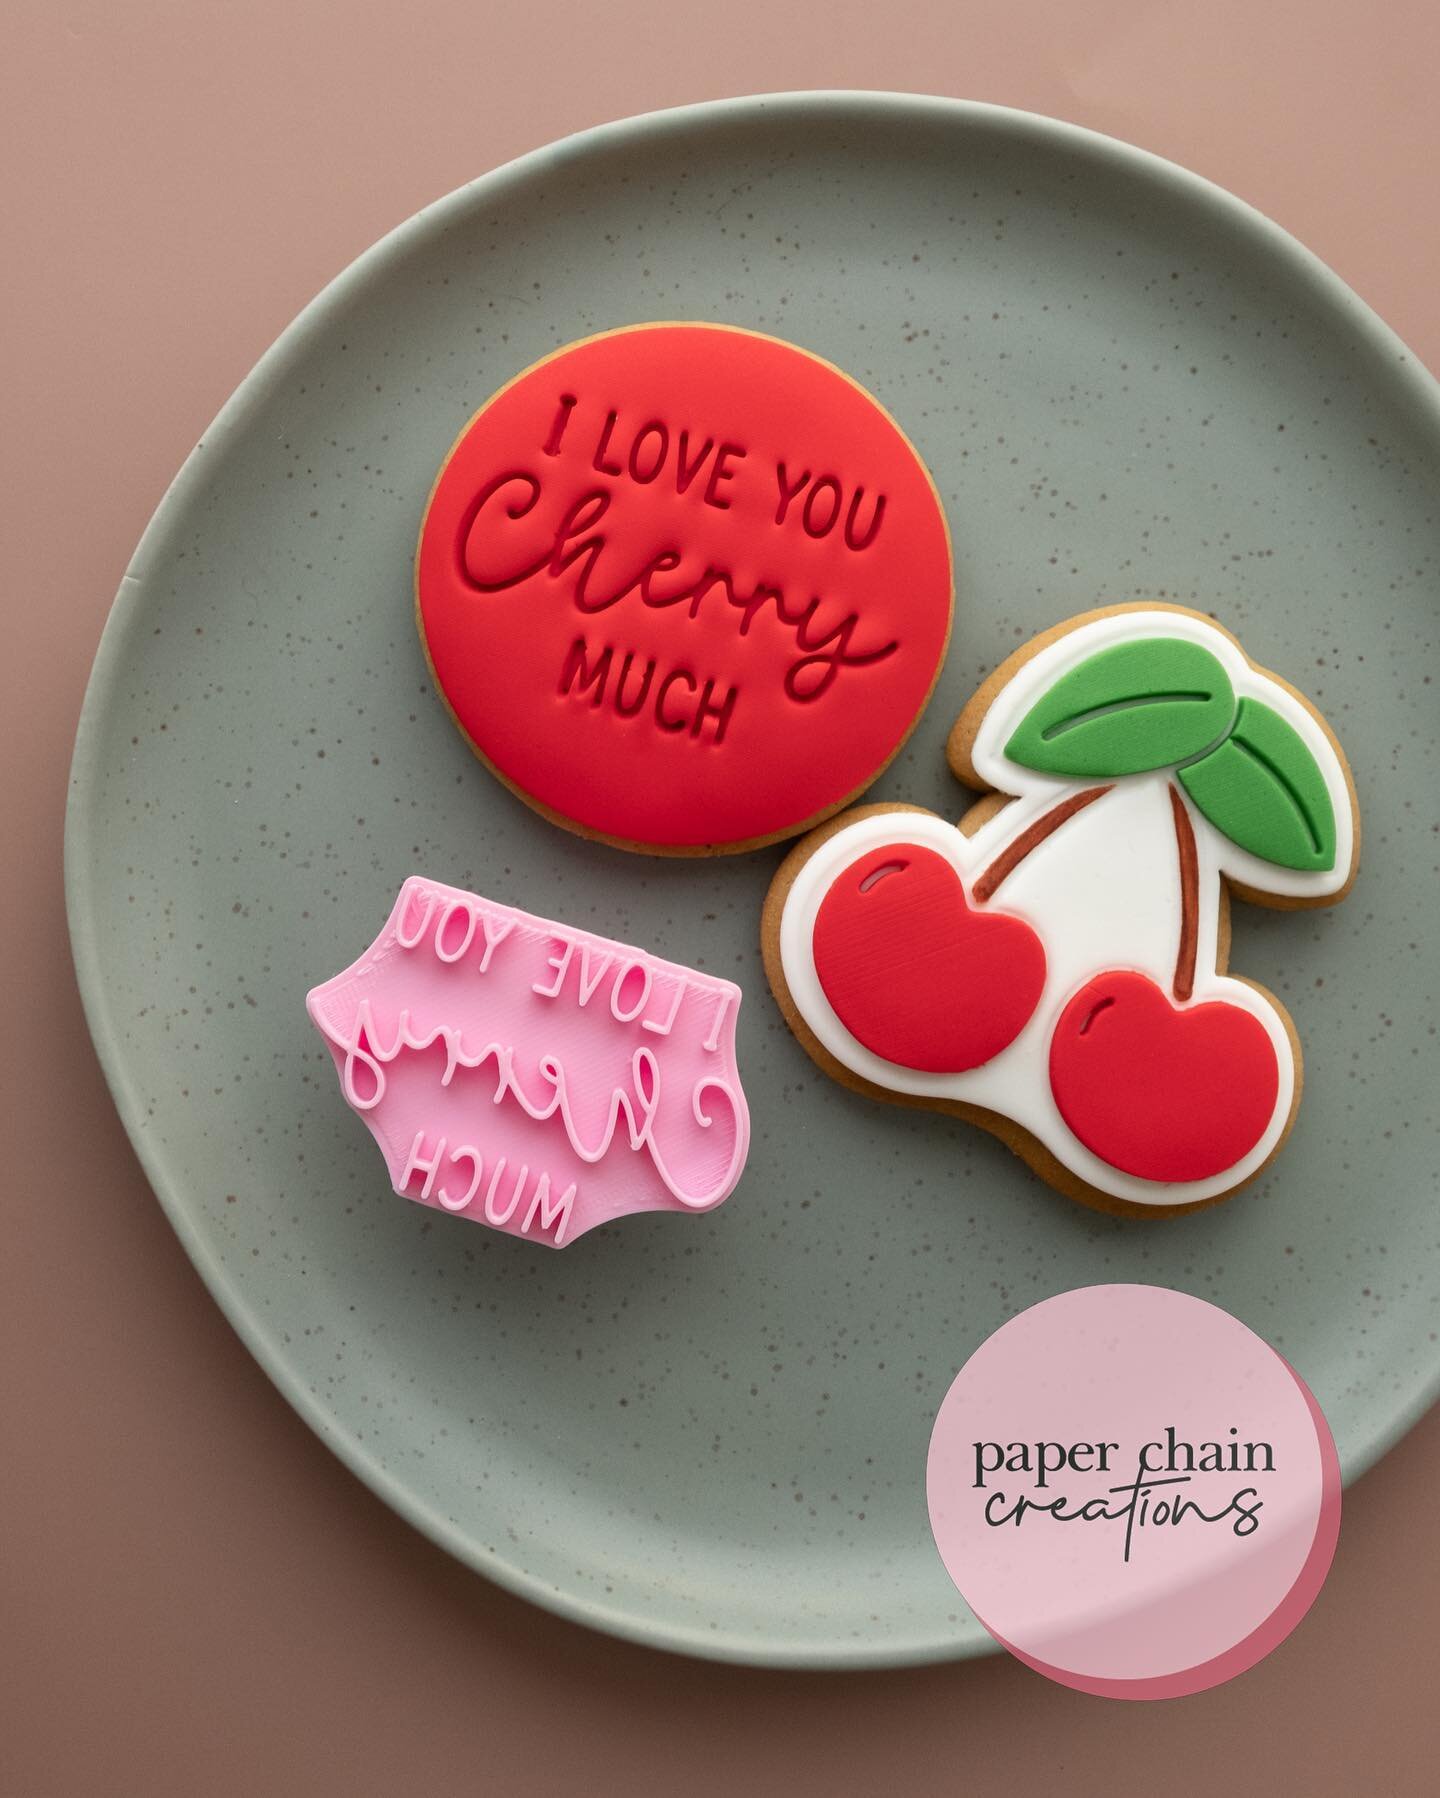 💕I love you cherry much 💕
.
How are you showing your mum how much you love her this Mother&rsquo;s Day? I&rsquo;m going to make some lovely fresh scones. 
.
This super cute embosser works well for Mother&rsquo;s Day, Valentine&rsquo;s Day, birthday